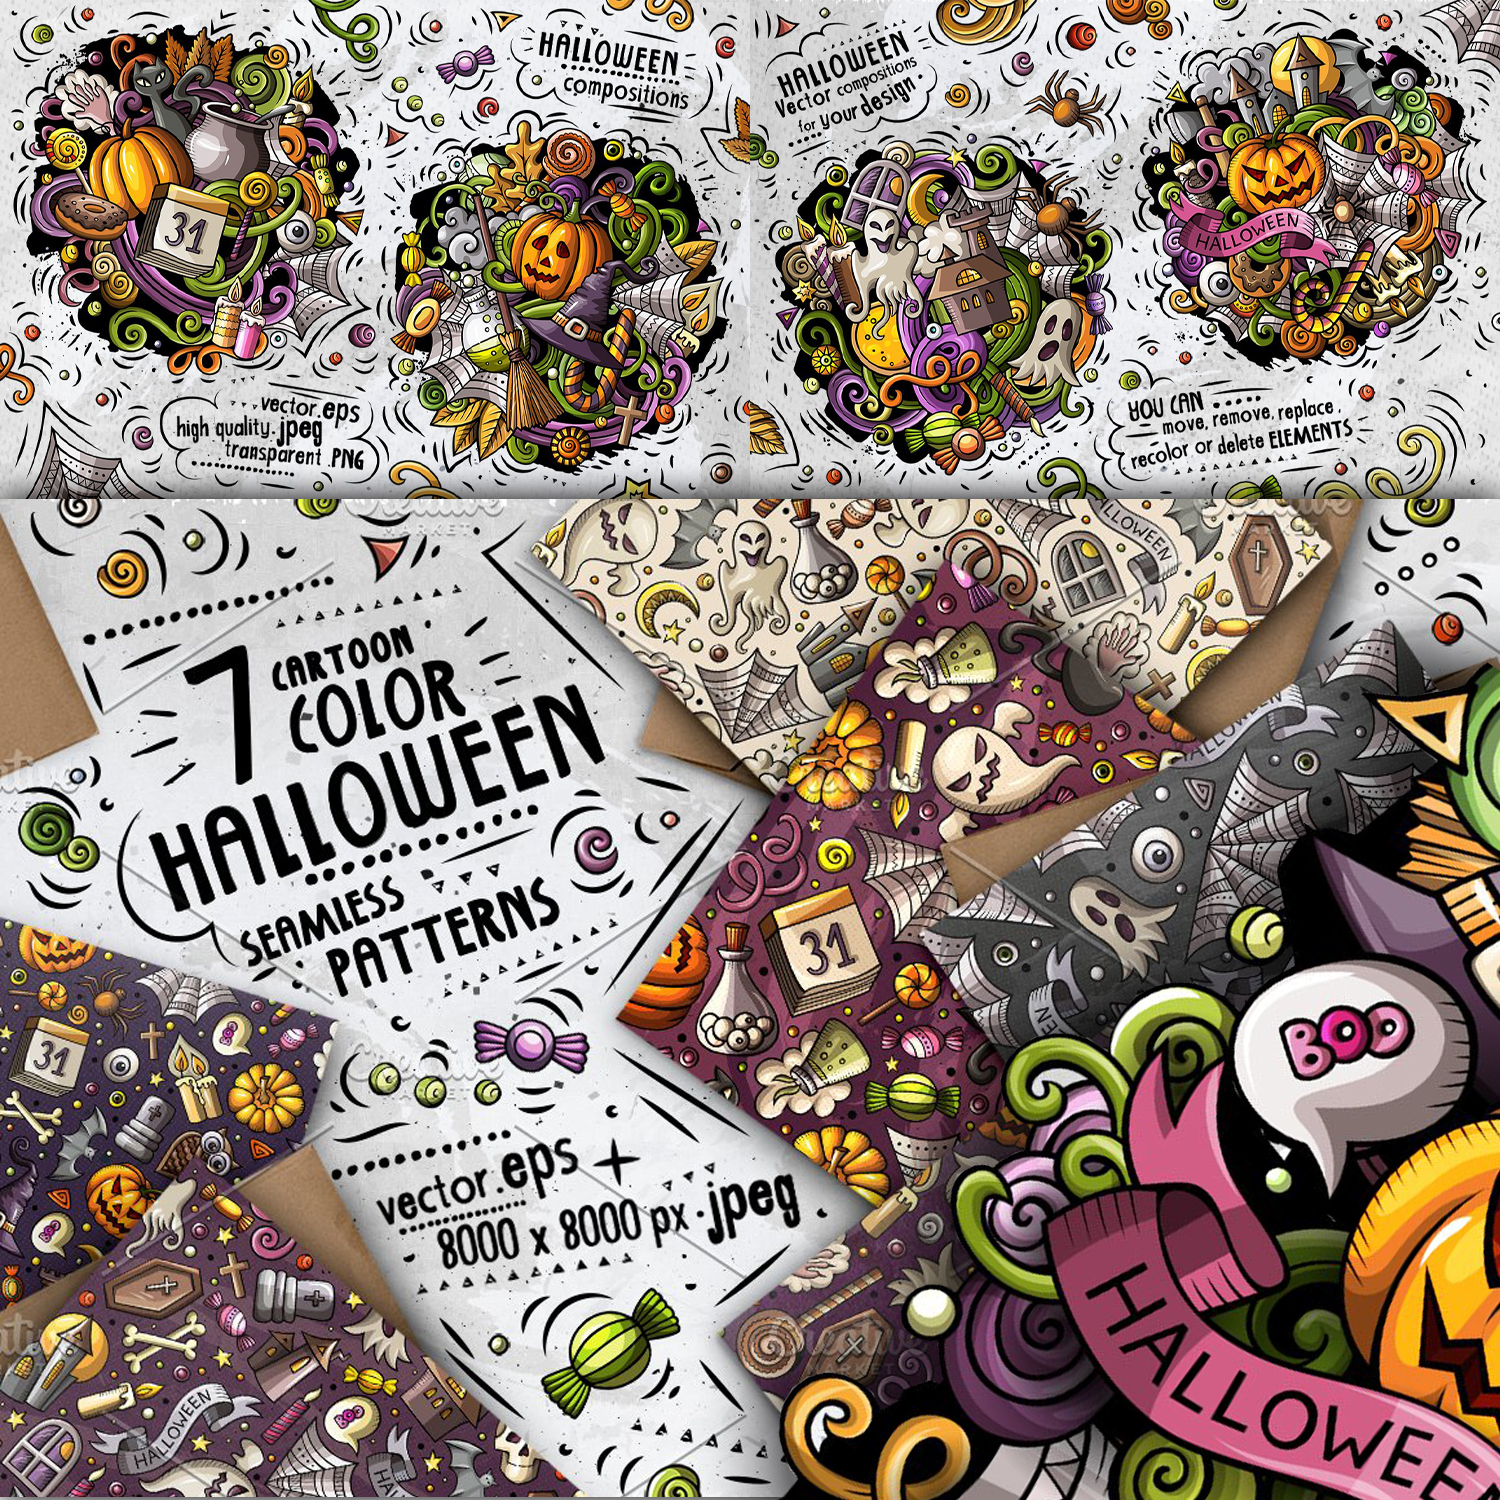 Pack of images on the theme of Halloween.